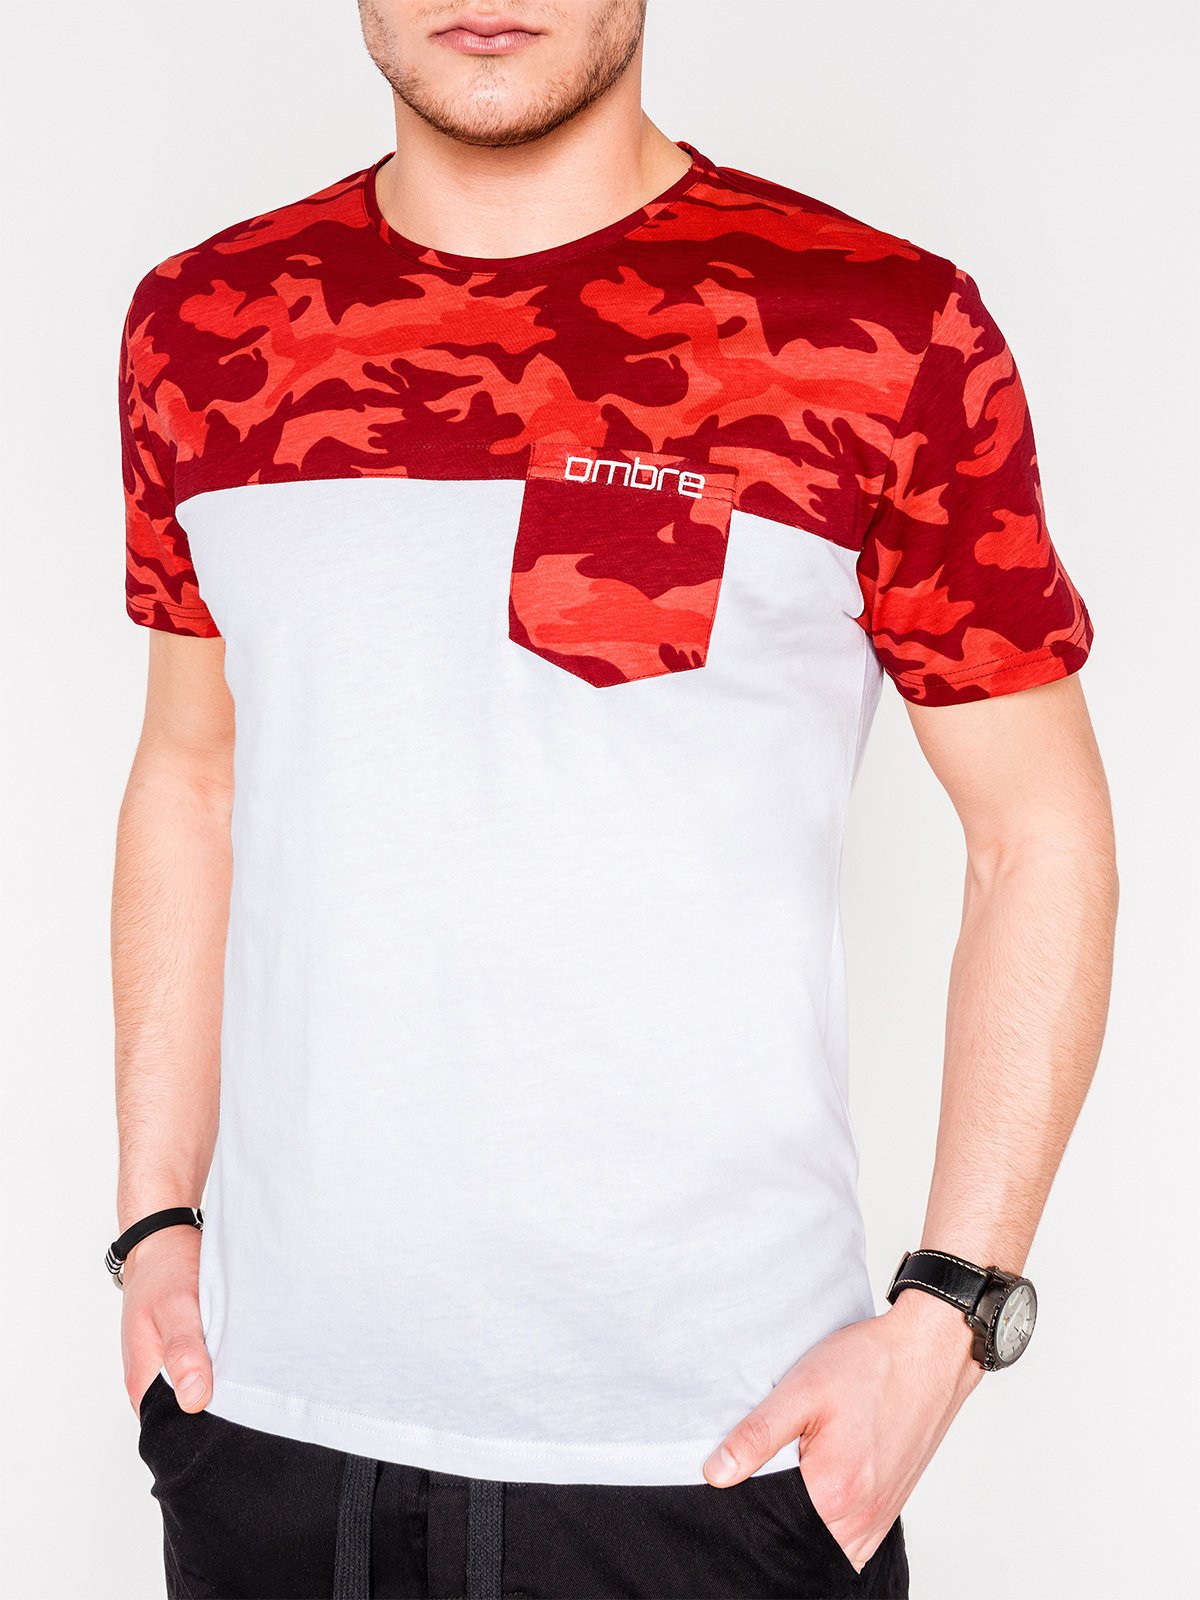 Men's printed t-shirt S1012 - red camo | MODONE wholesale - Clothing ...